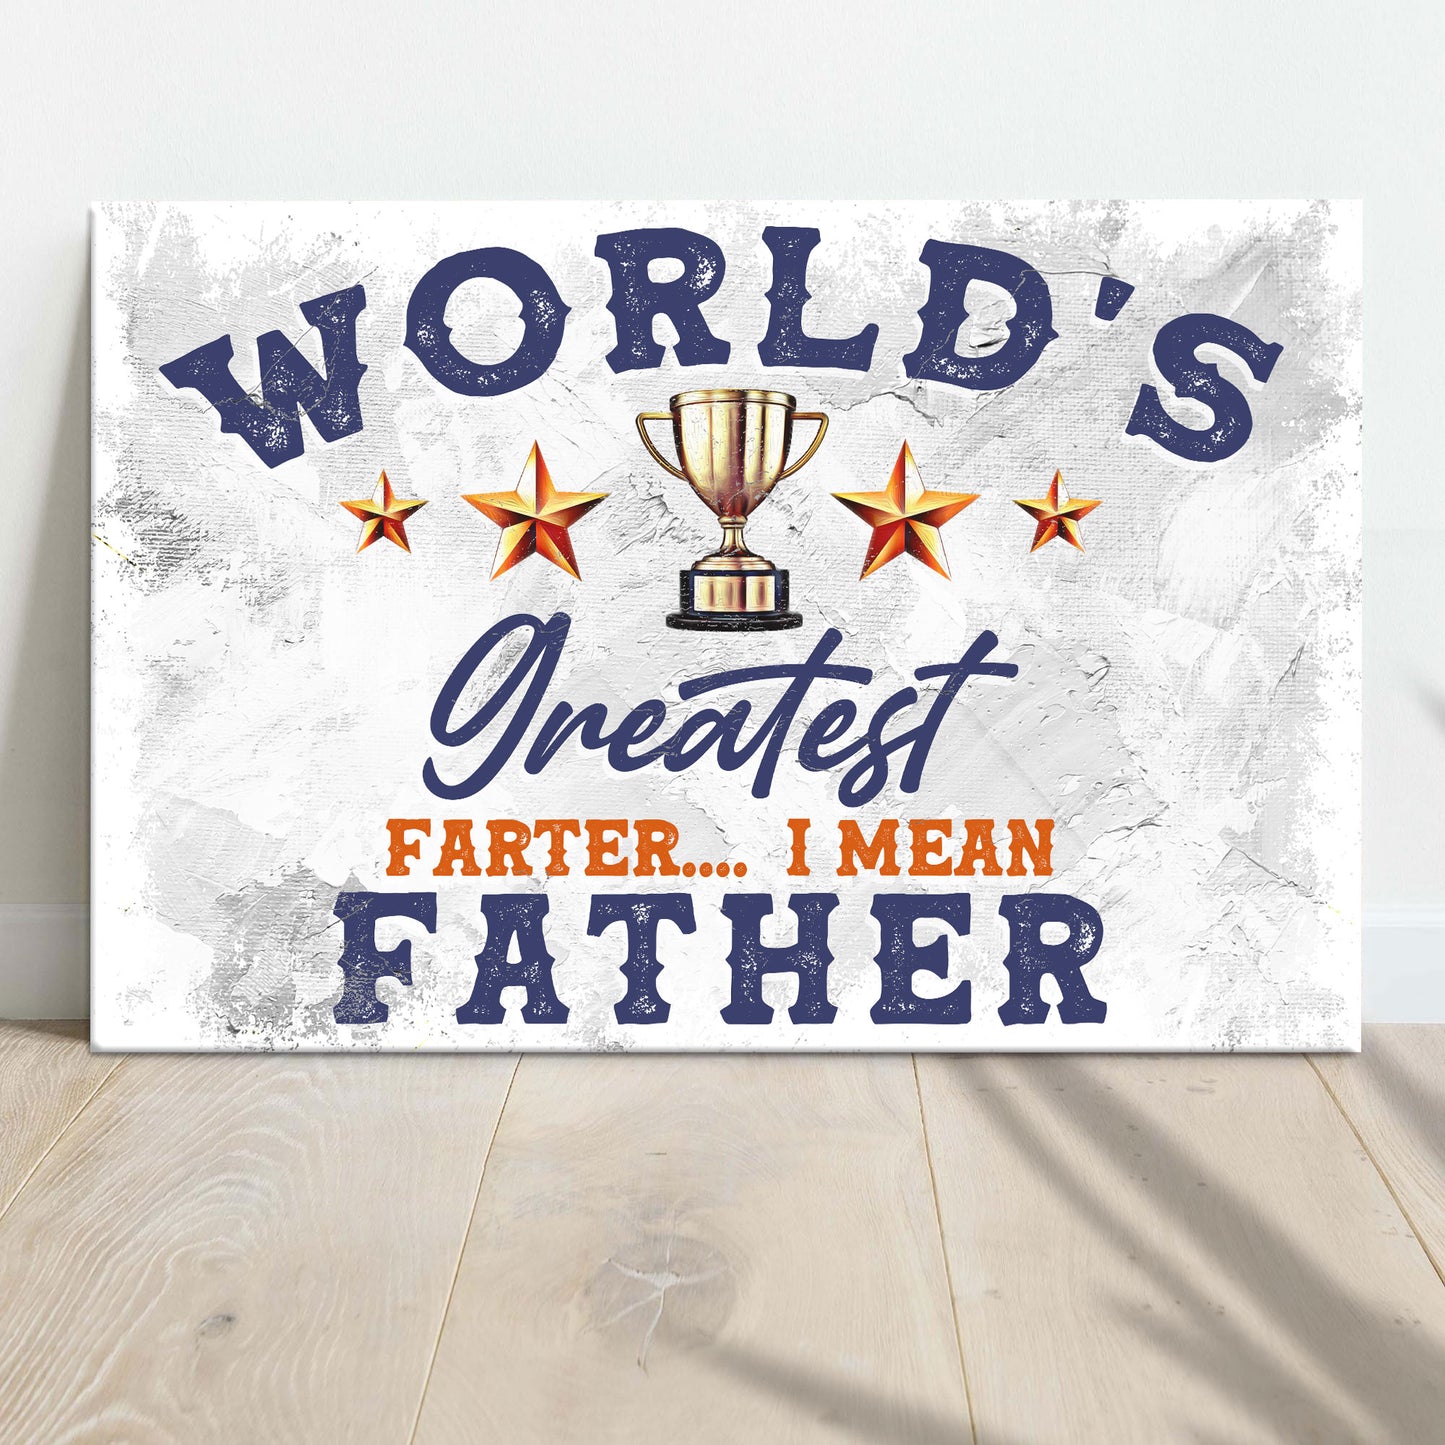 World's Greatest Farter Happy Father's Day Sign - Image by Tailored Canvases